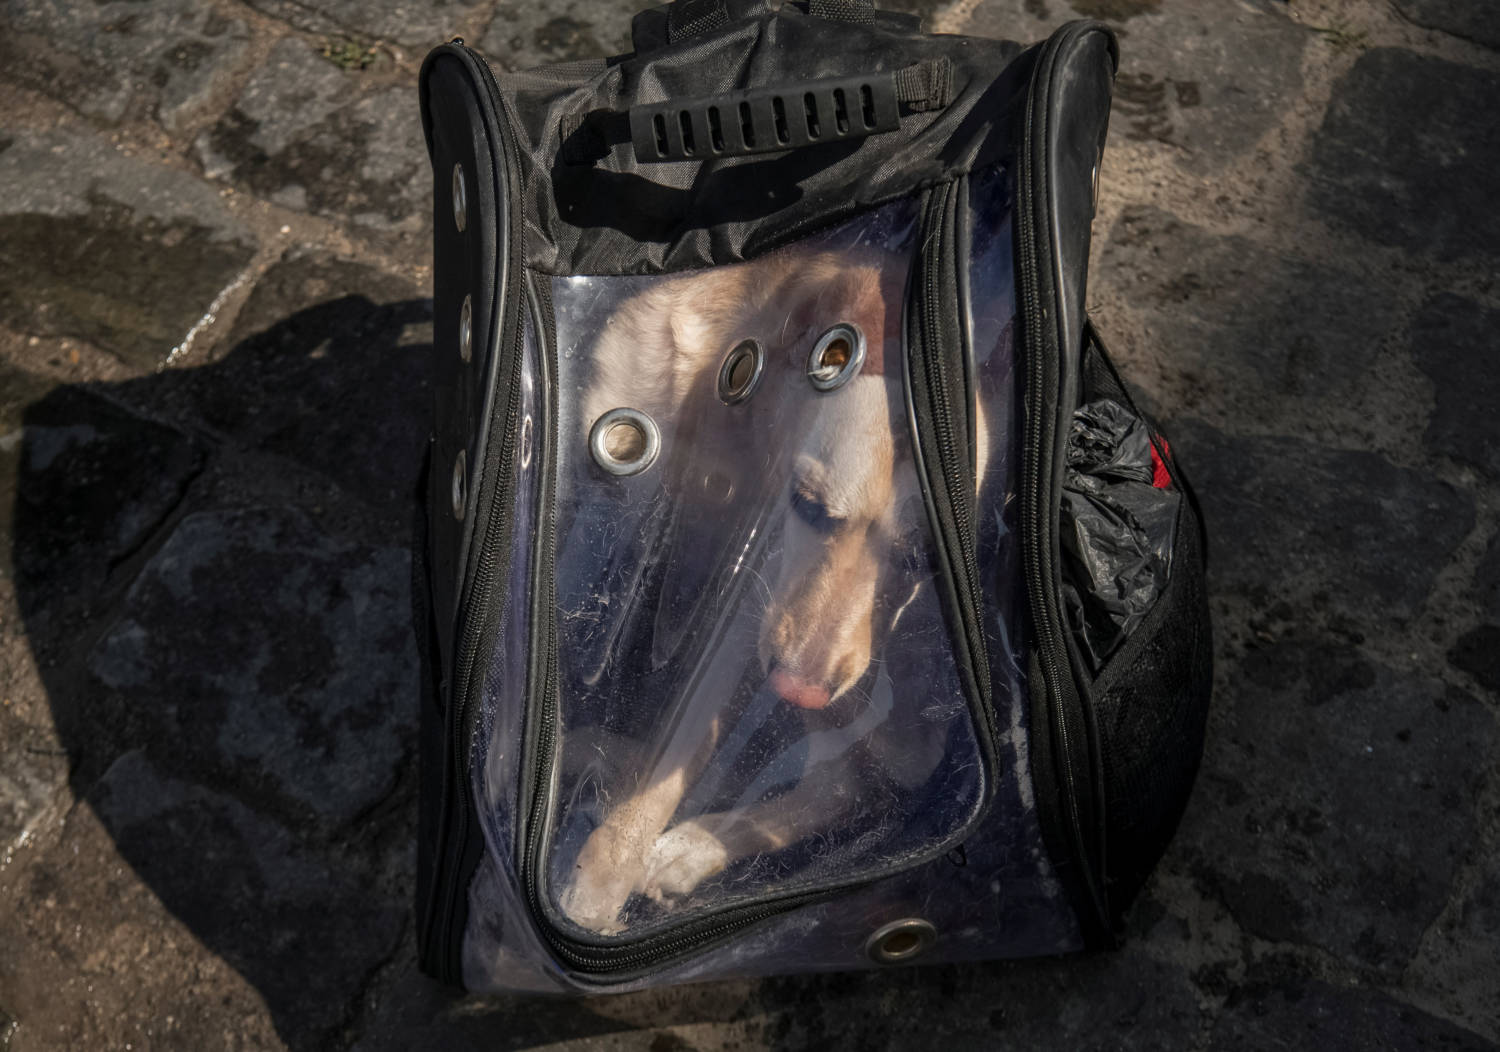 A Dog Is Seen In A Carry On After Local Residents Were Evacuated From A Flooded Area After The Nova Kakhovka Dam Breached, In Kherson